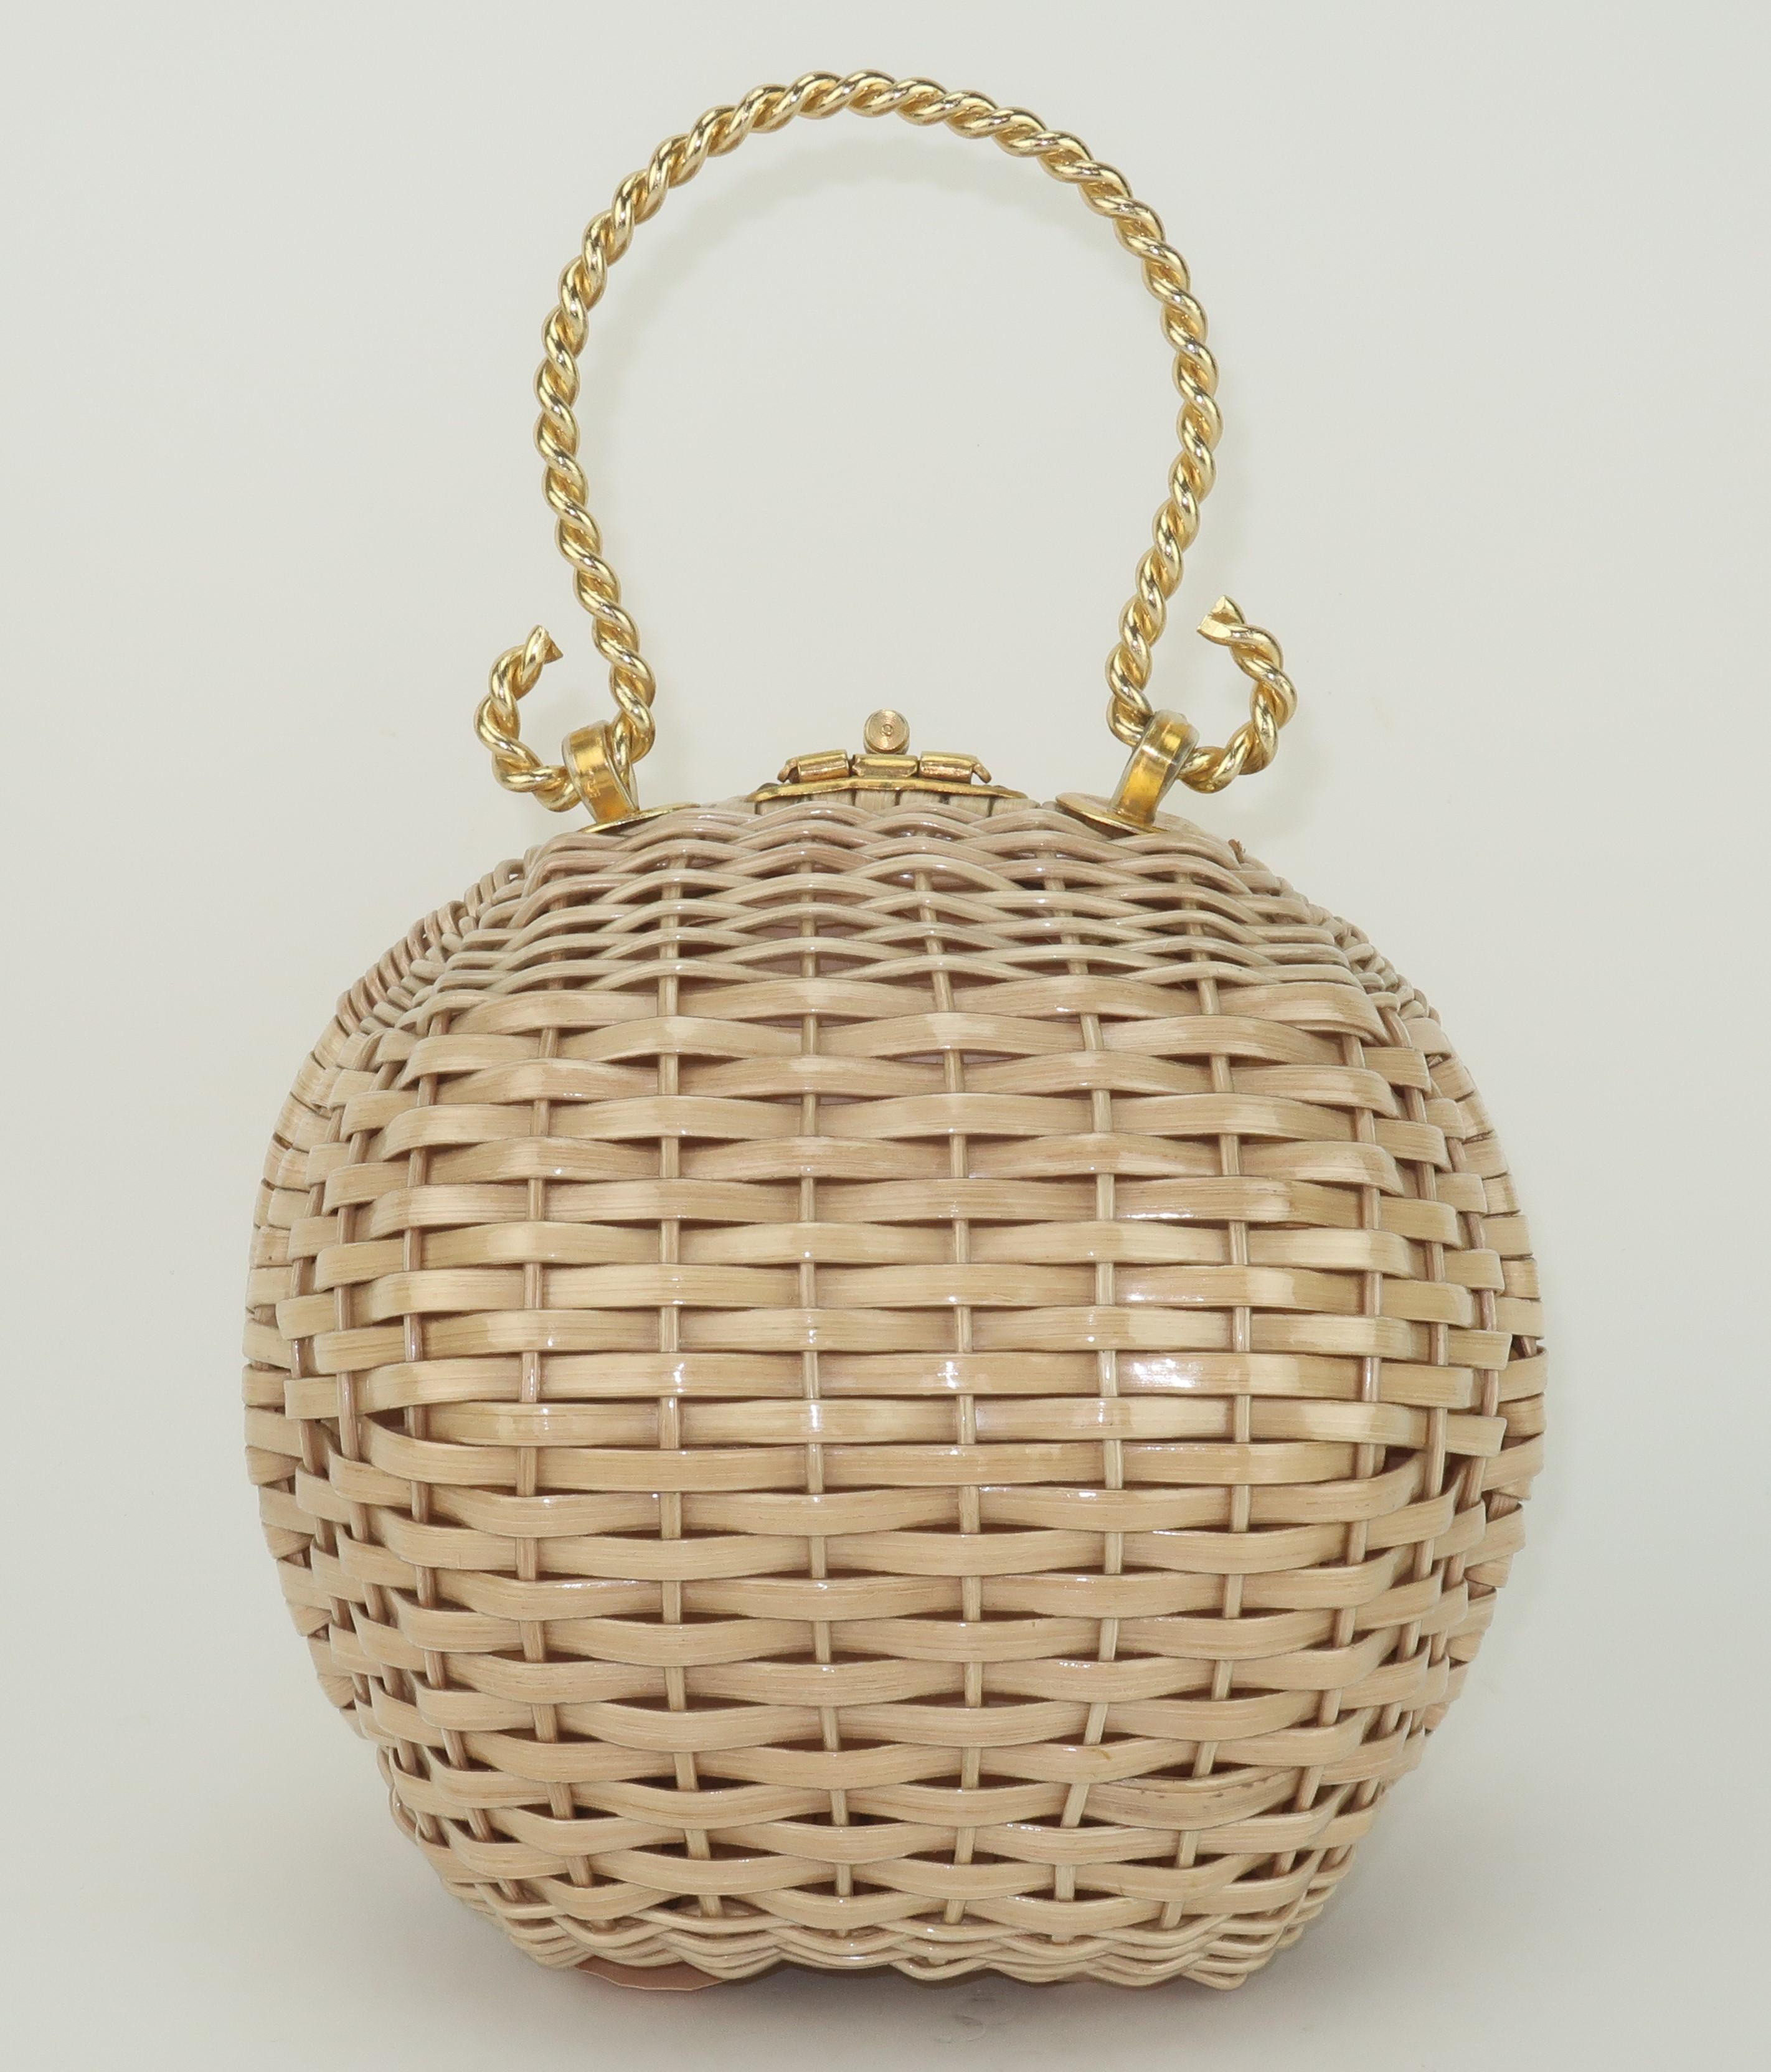 Women's Wicker Ball Shaped Handbag With Gold Handle, 1960's For Sale